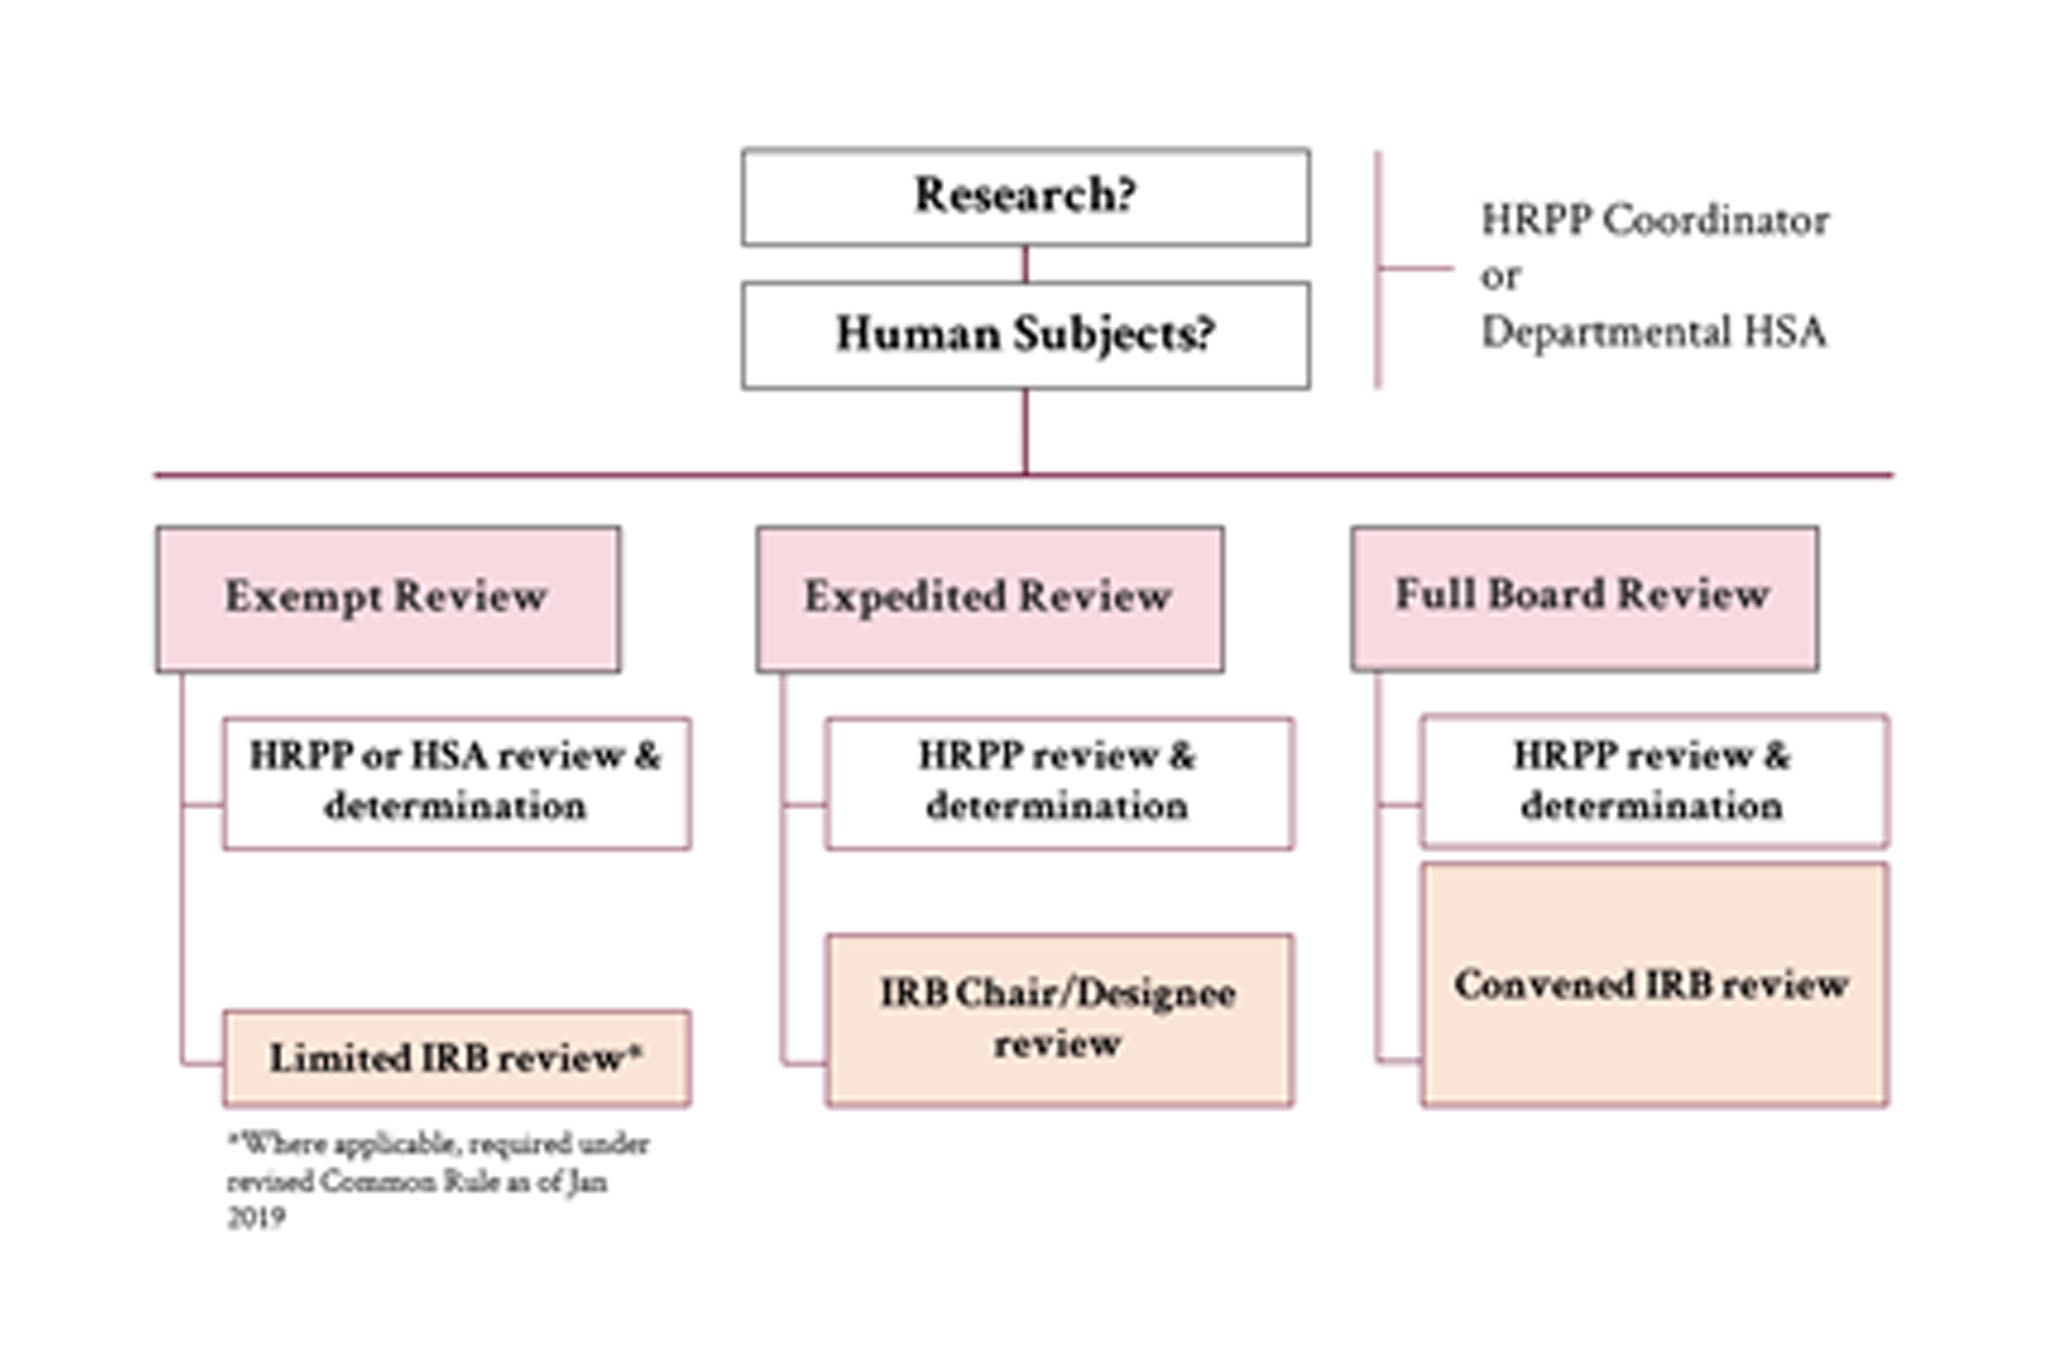 A graphic showing the review process structure of a submitted protocol.